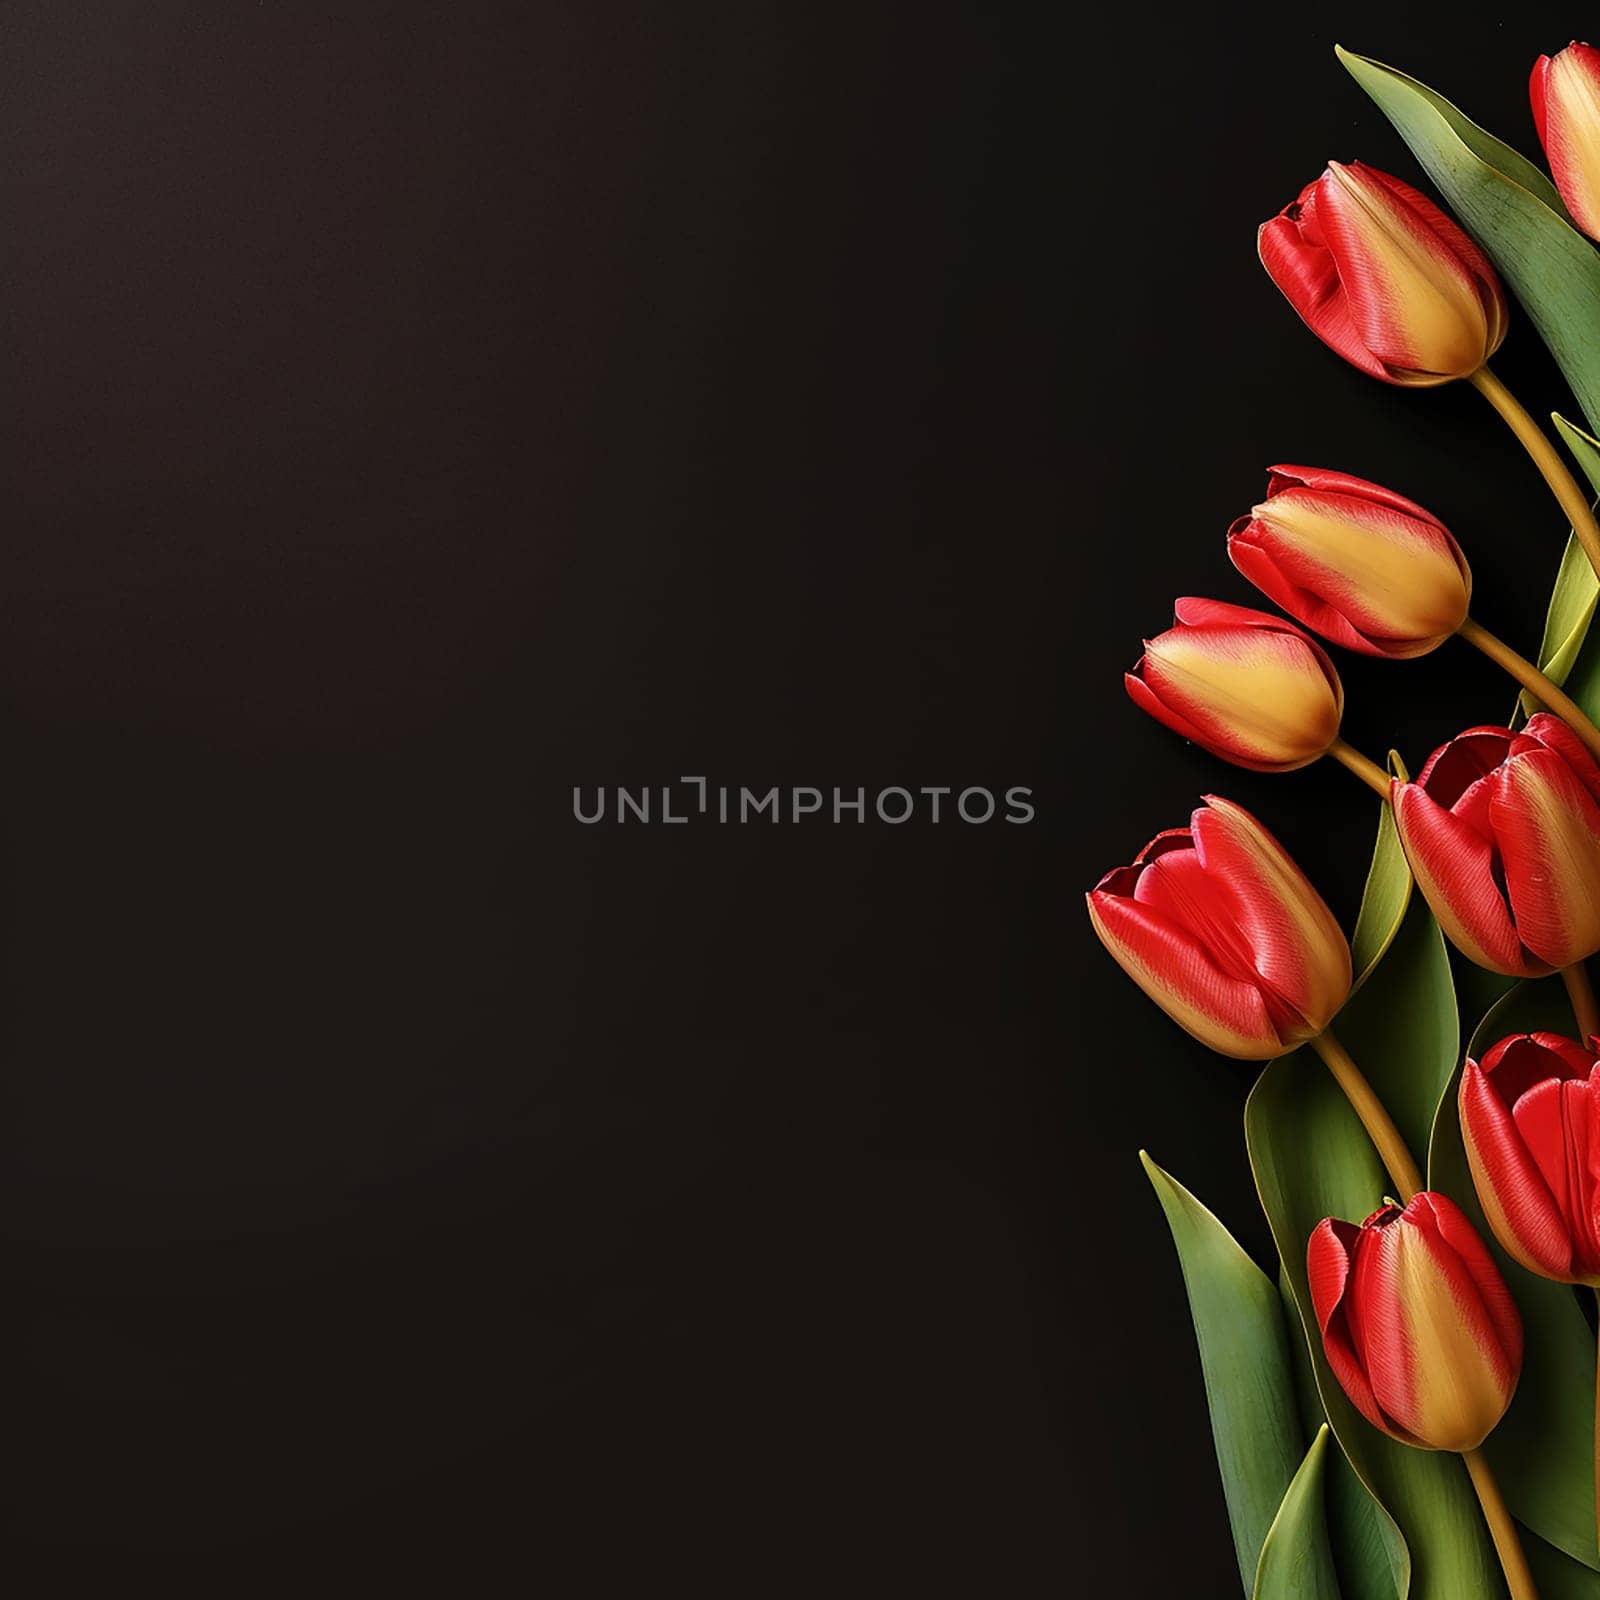 A bunch of red and yellow tulips against a dark background